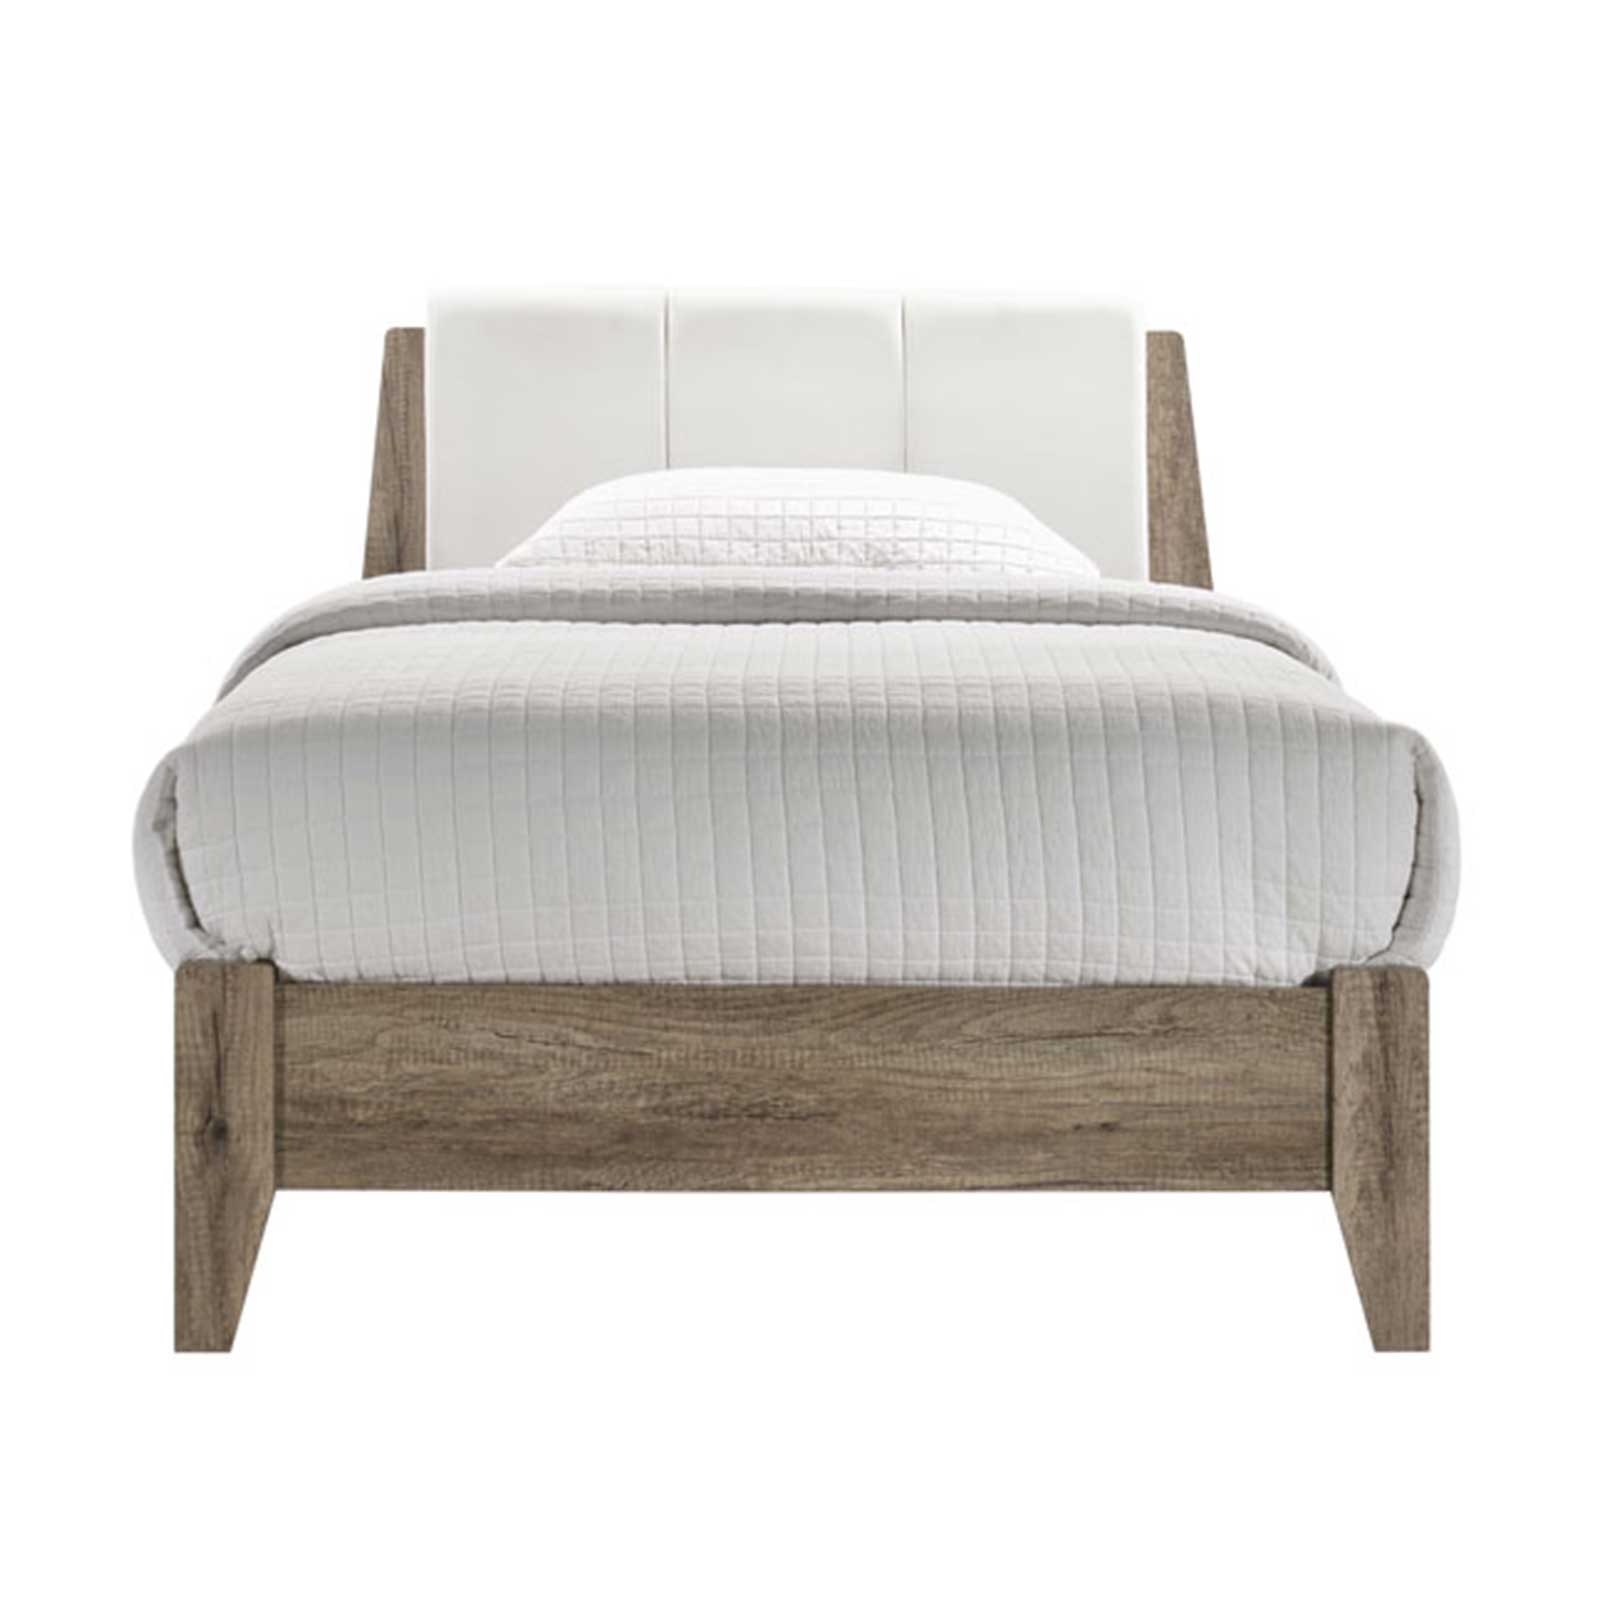 Nobu Wooden Bed Frame Australia, Wood And Leather Queen Headboard